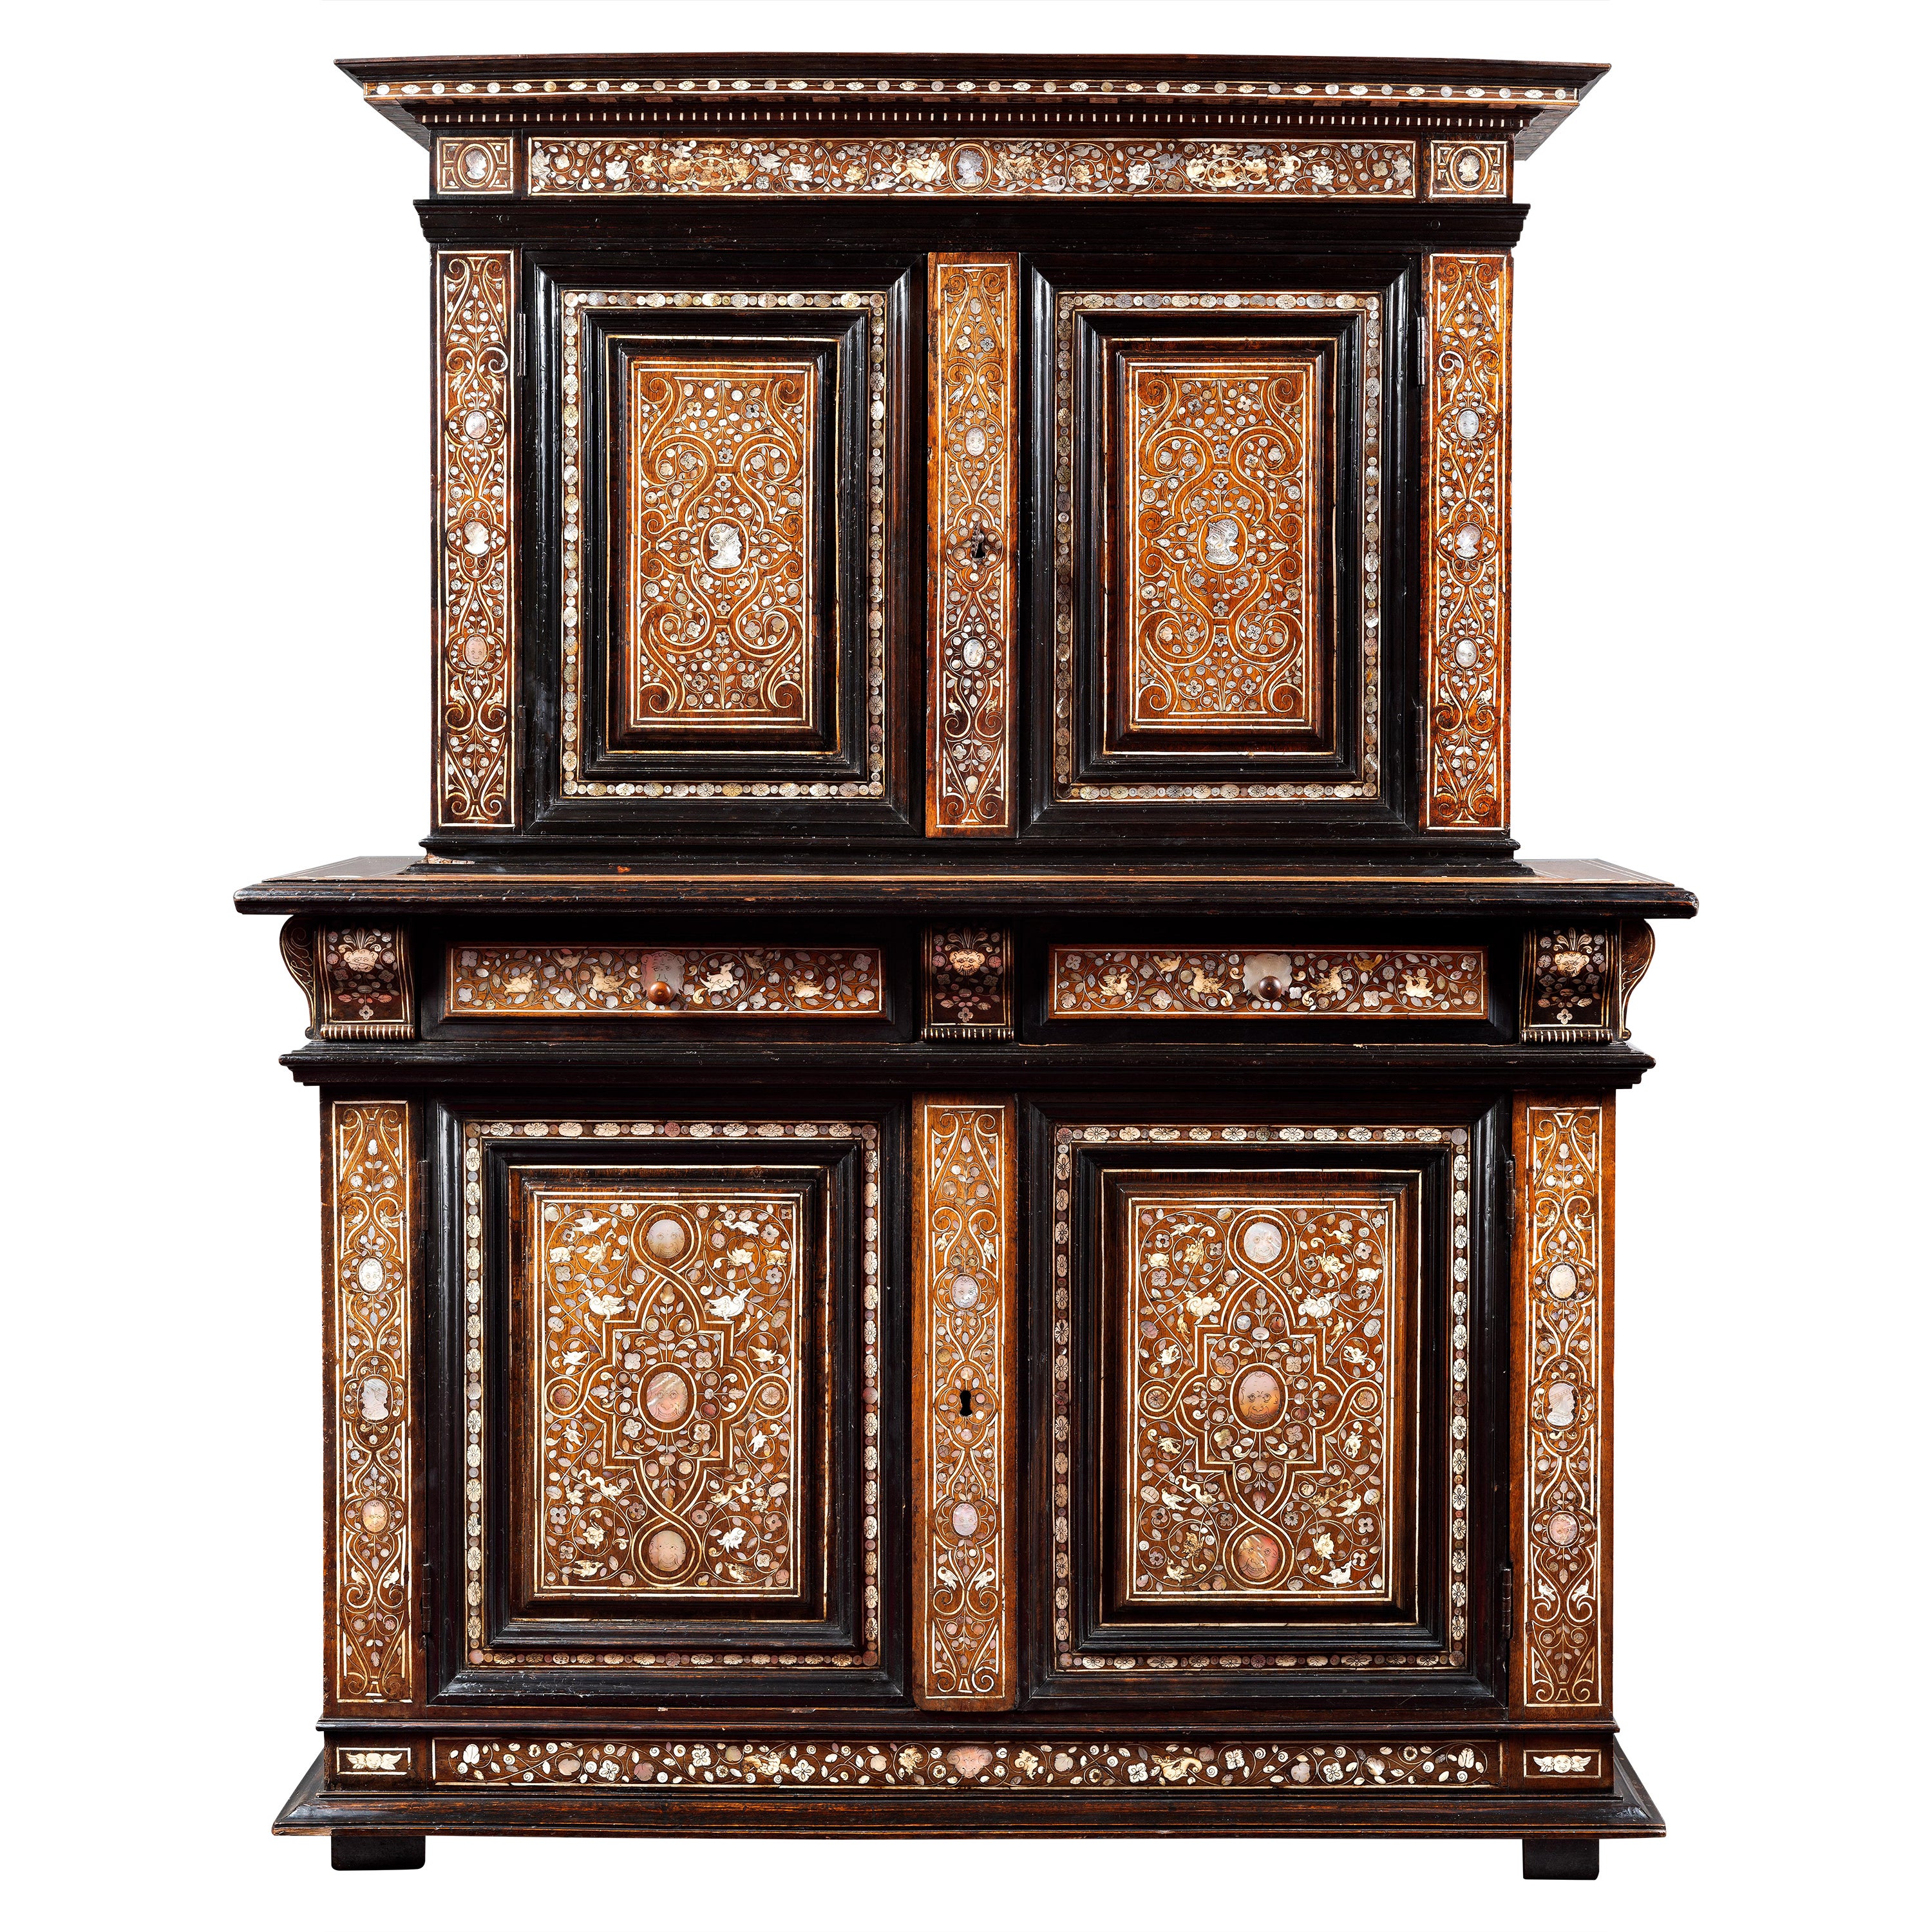 Important Renaissance Cabinet with Mother-of-pearl Inlays